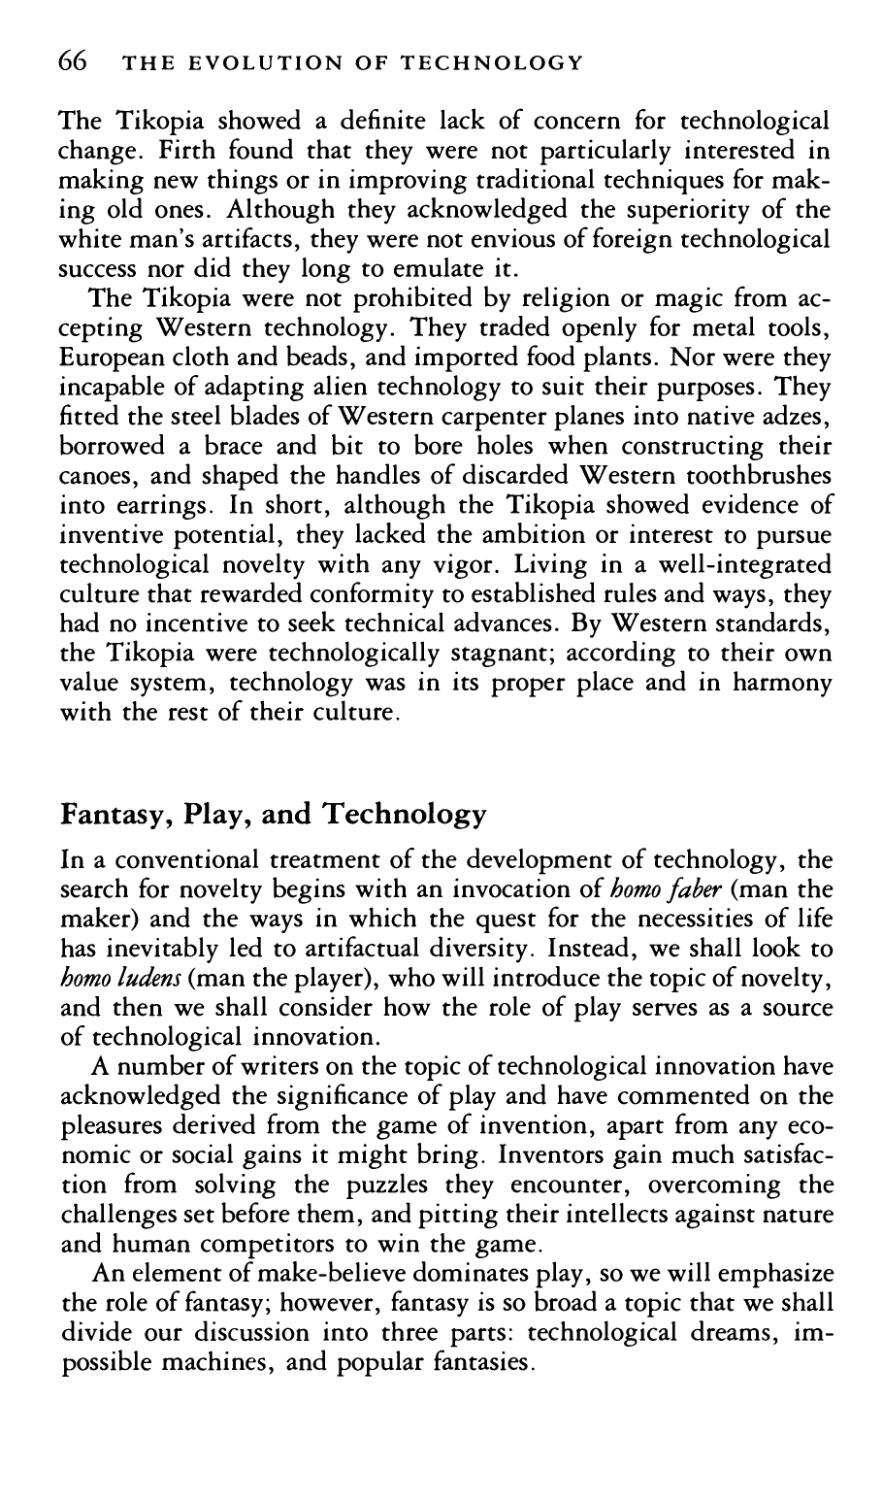 Fantasy, Play, and Technology